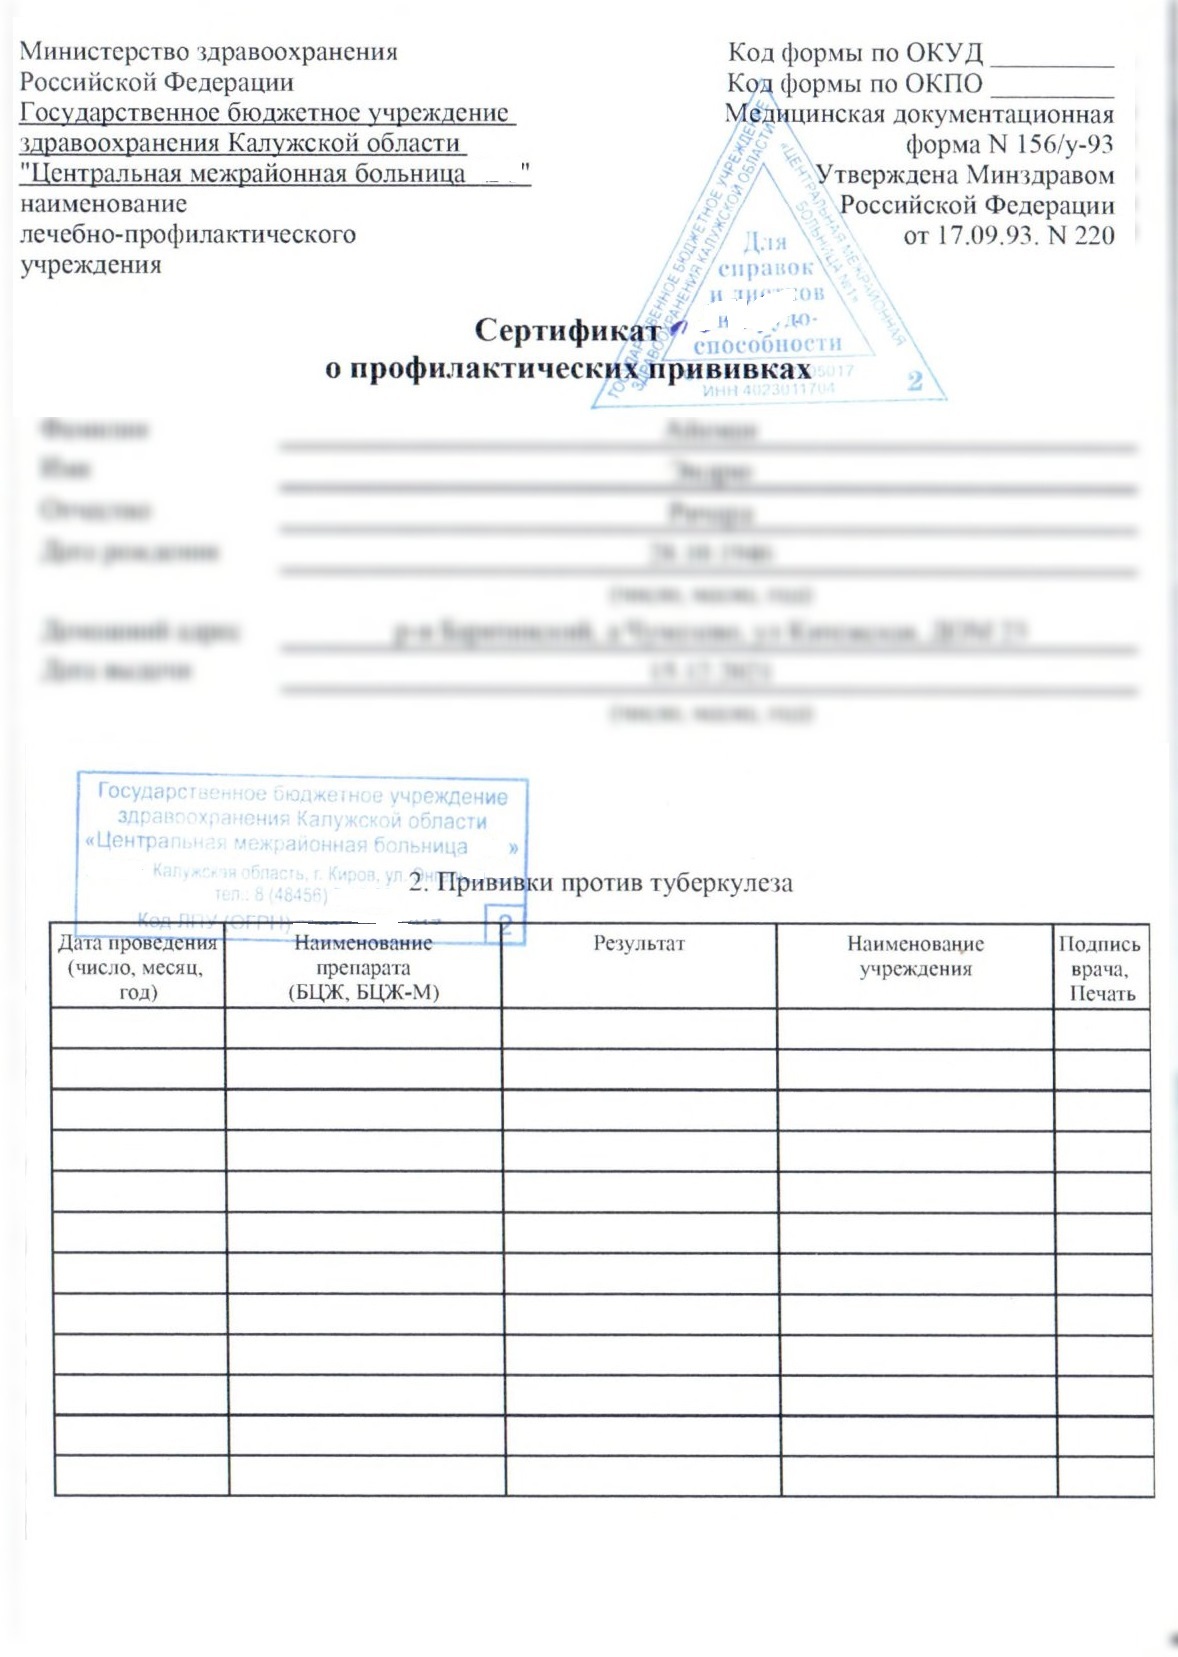 Russian to English translation of medical report_03